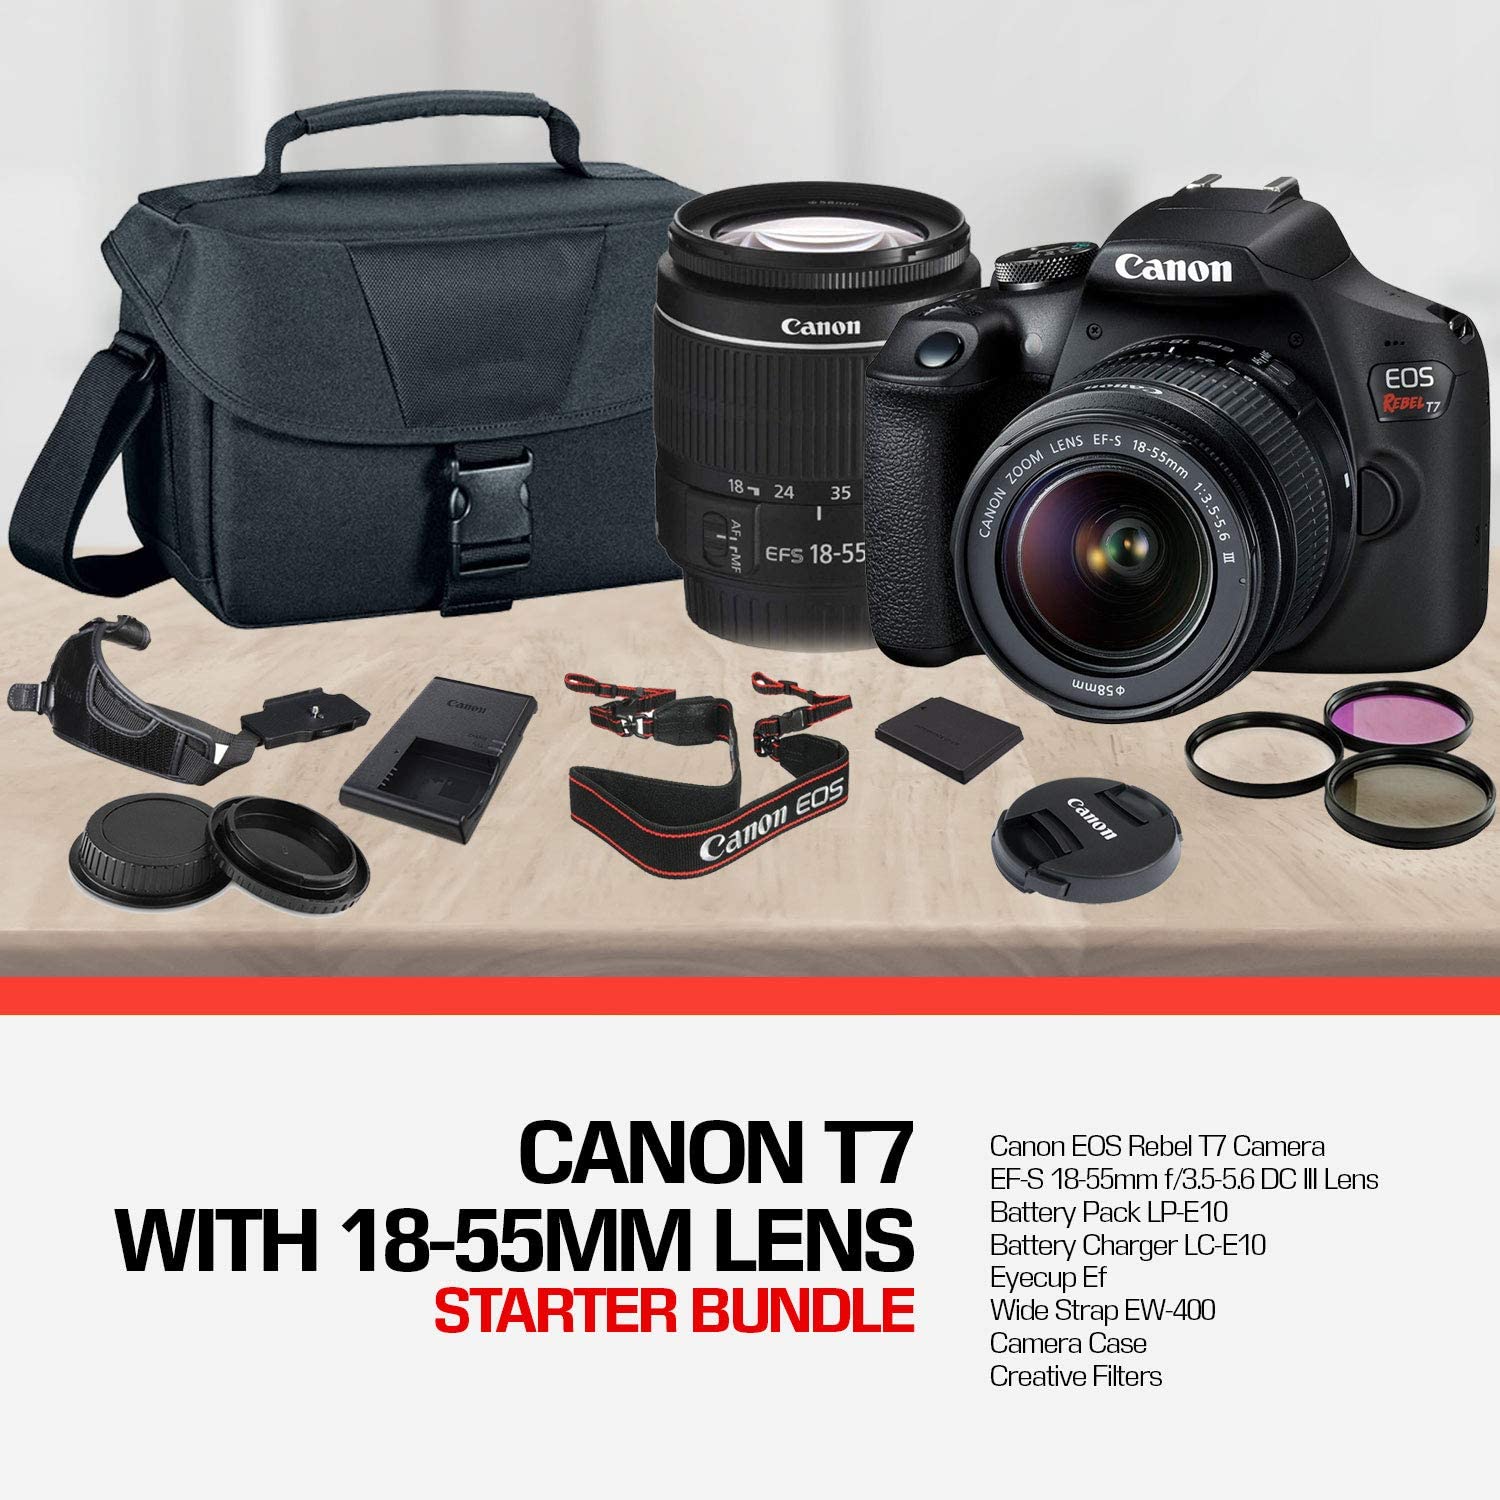 Canon Rebel T7 DSLR Camera with 18-55mm  Lens Kit and Carrying Case, Creative Filters, Cleaning Kit, and More - image 3 of 6